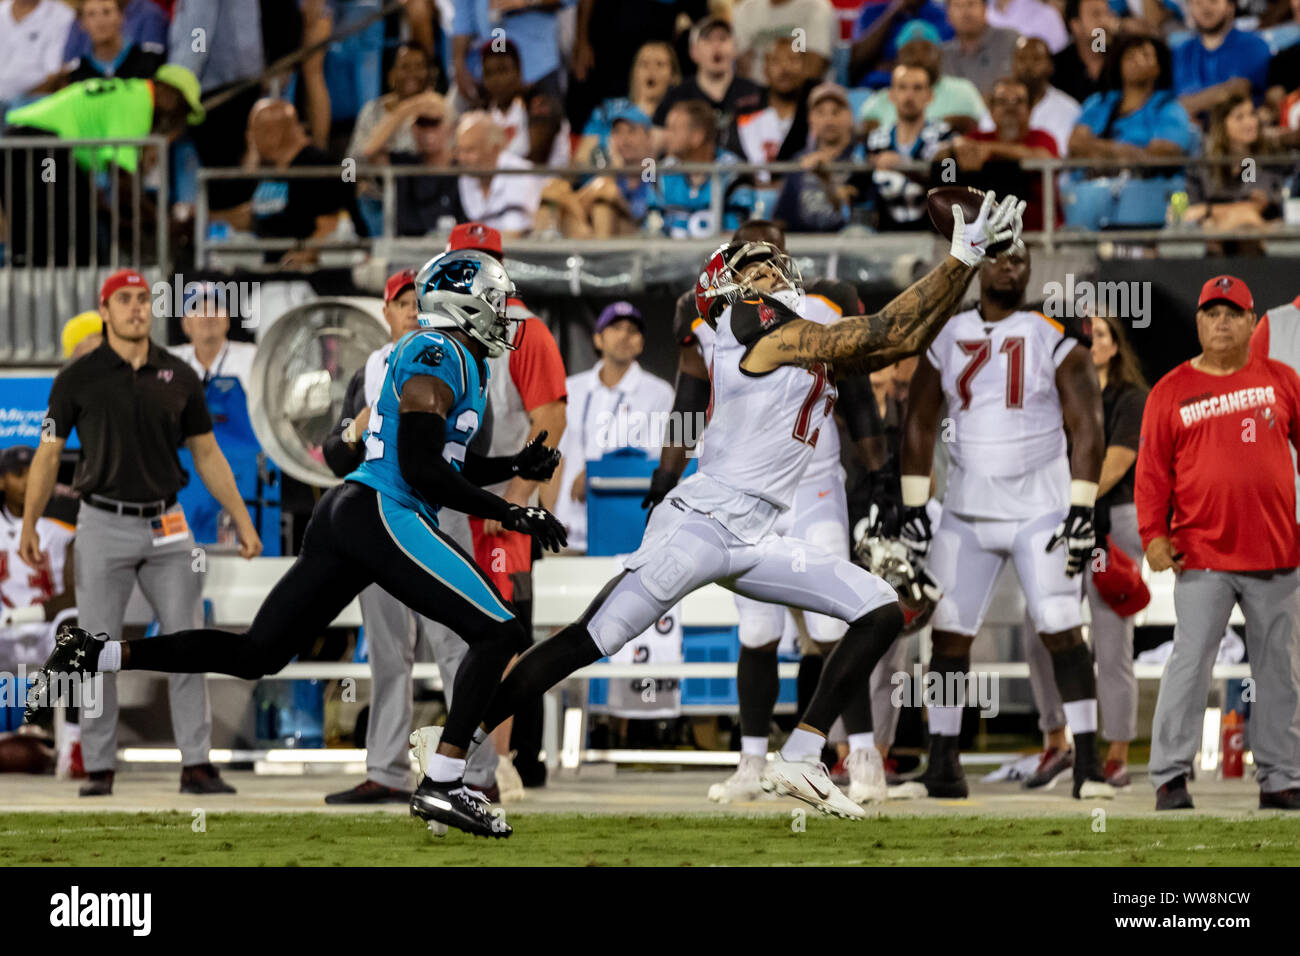 Charlotte, North Carolina, USA. 12th Sep, 2019. Tampa Bay Buccaneers wide receiver Mike Evans (13) makes a catch at Bank of America Stadium. The Buccaneers won 20-14. Credit: Jason Walle/ZUMA Wire/Alamy Live News Stock Photo